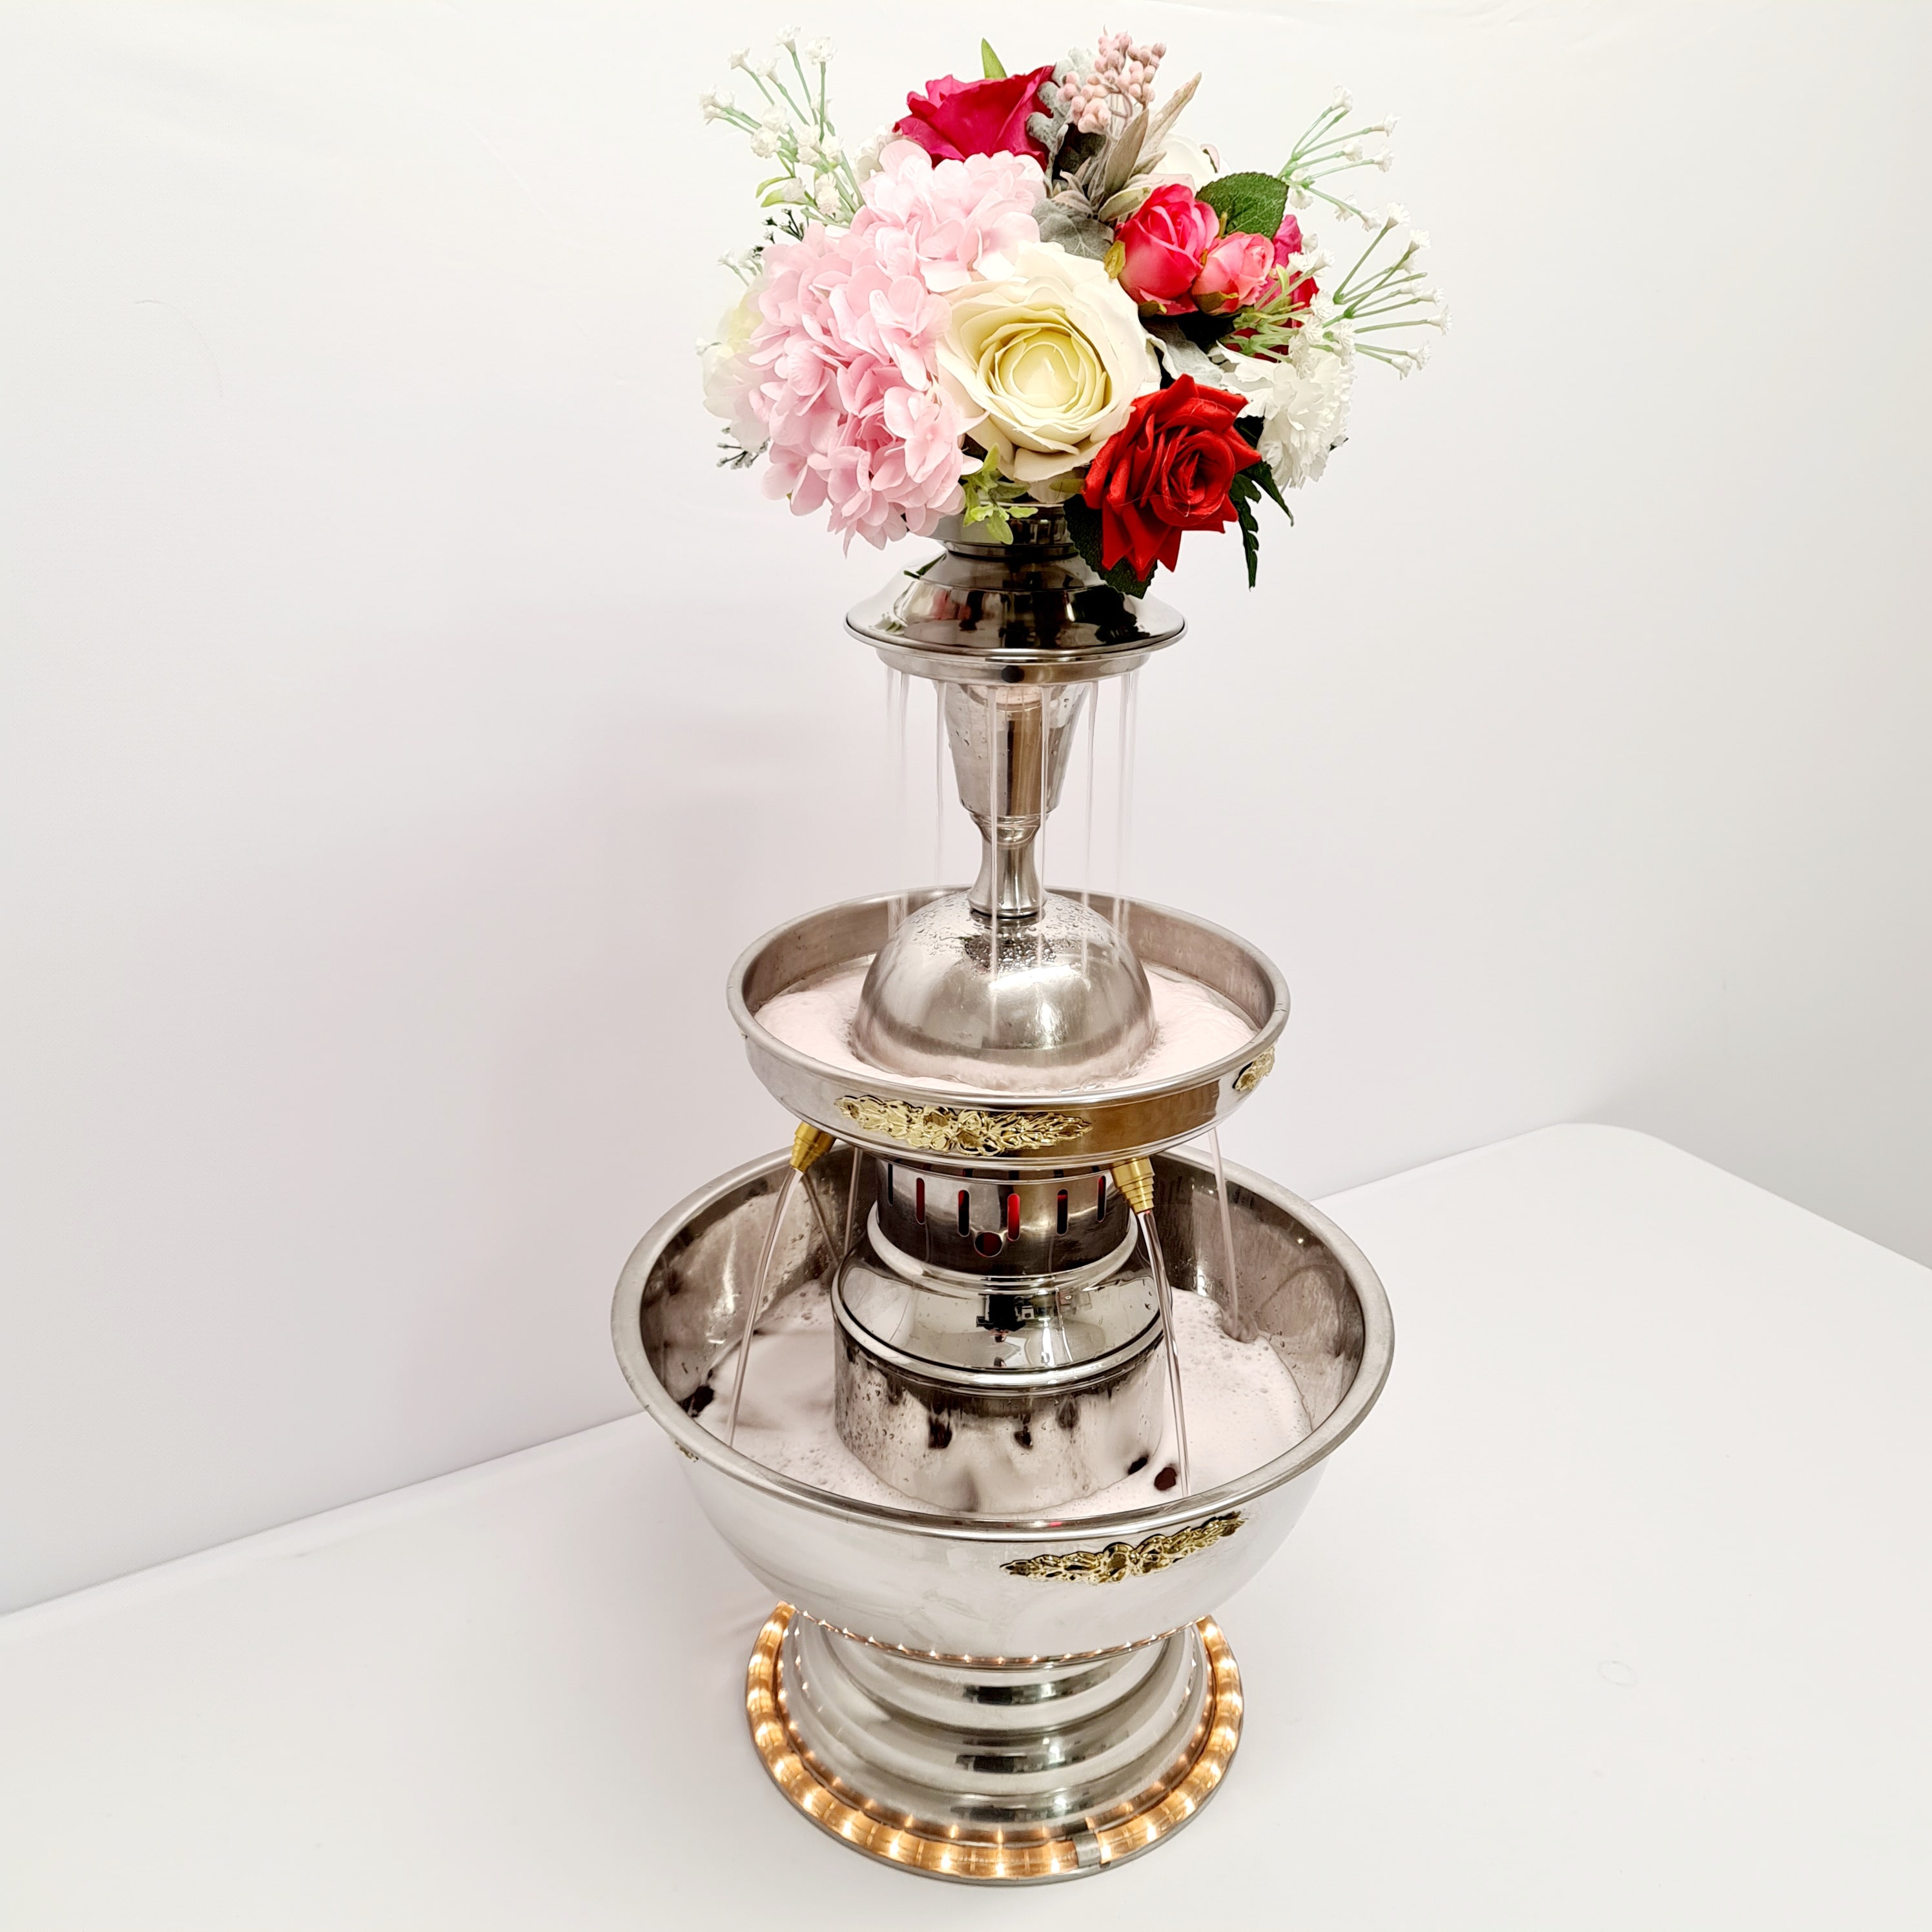 https://www.carolynssweets.ie/wp-content/gallery/standard-champagne-fountain/Champagne-Drinks-Fountain-Standard-2.jpg